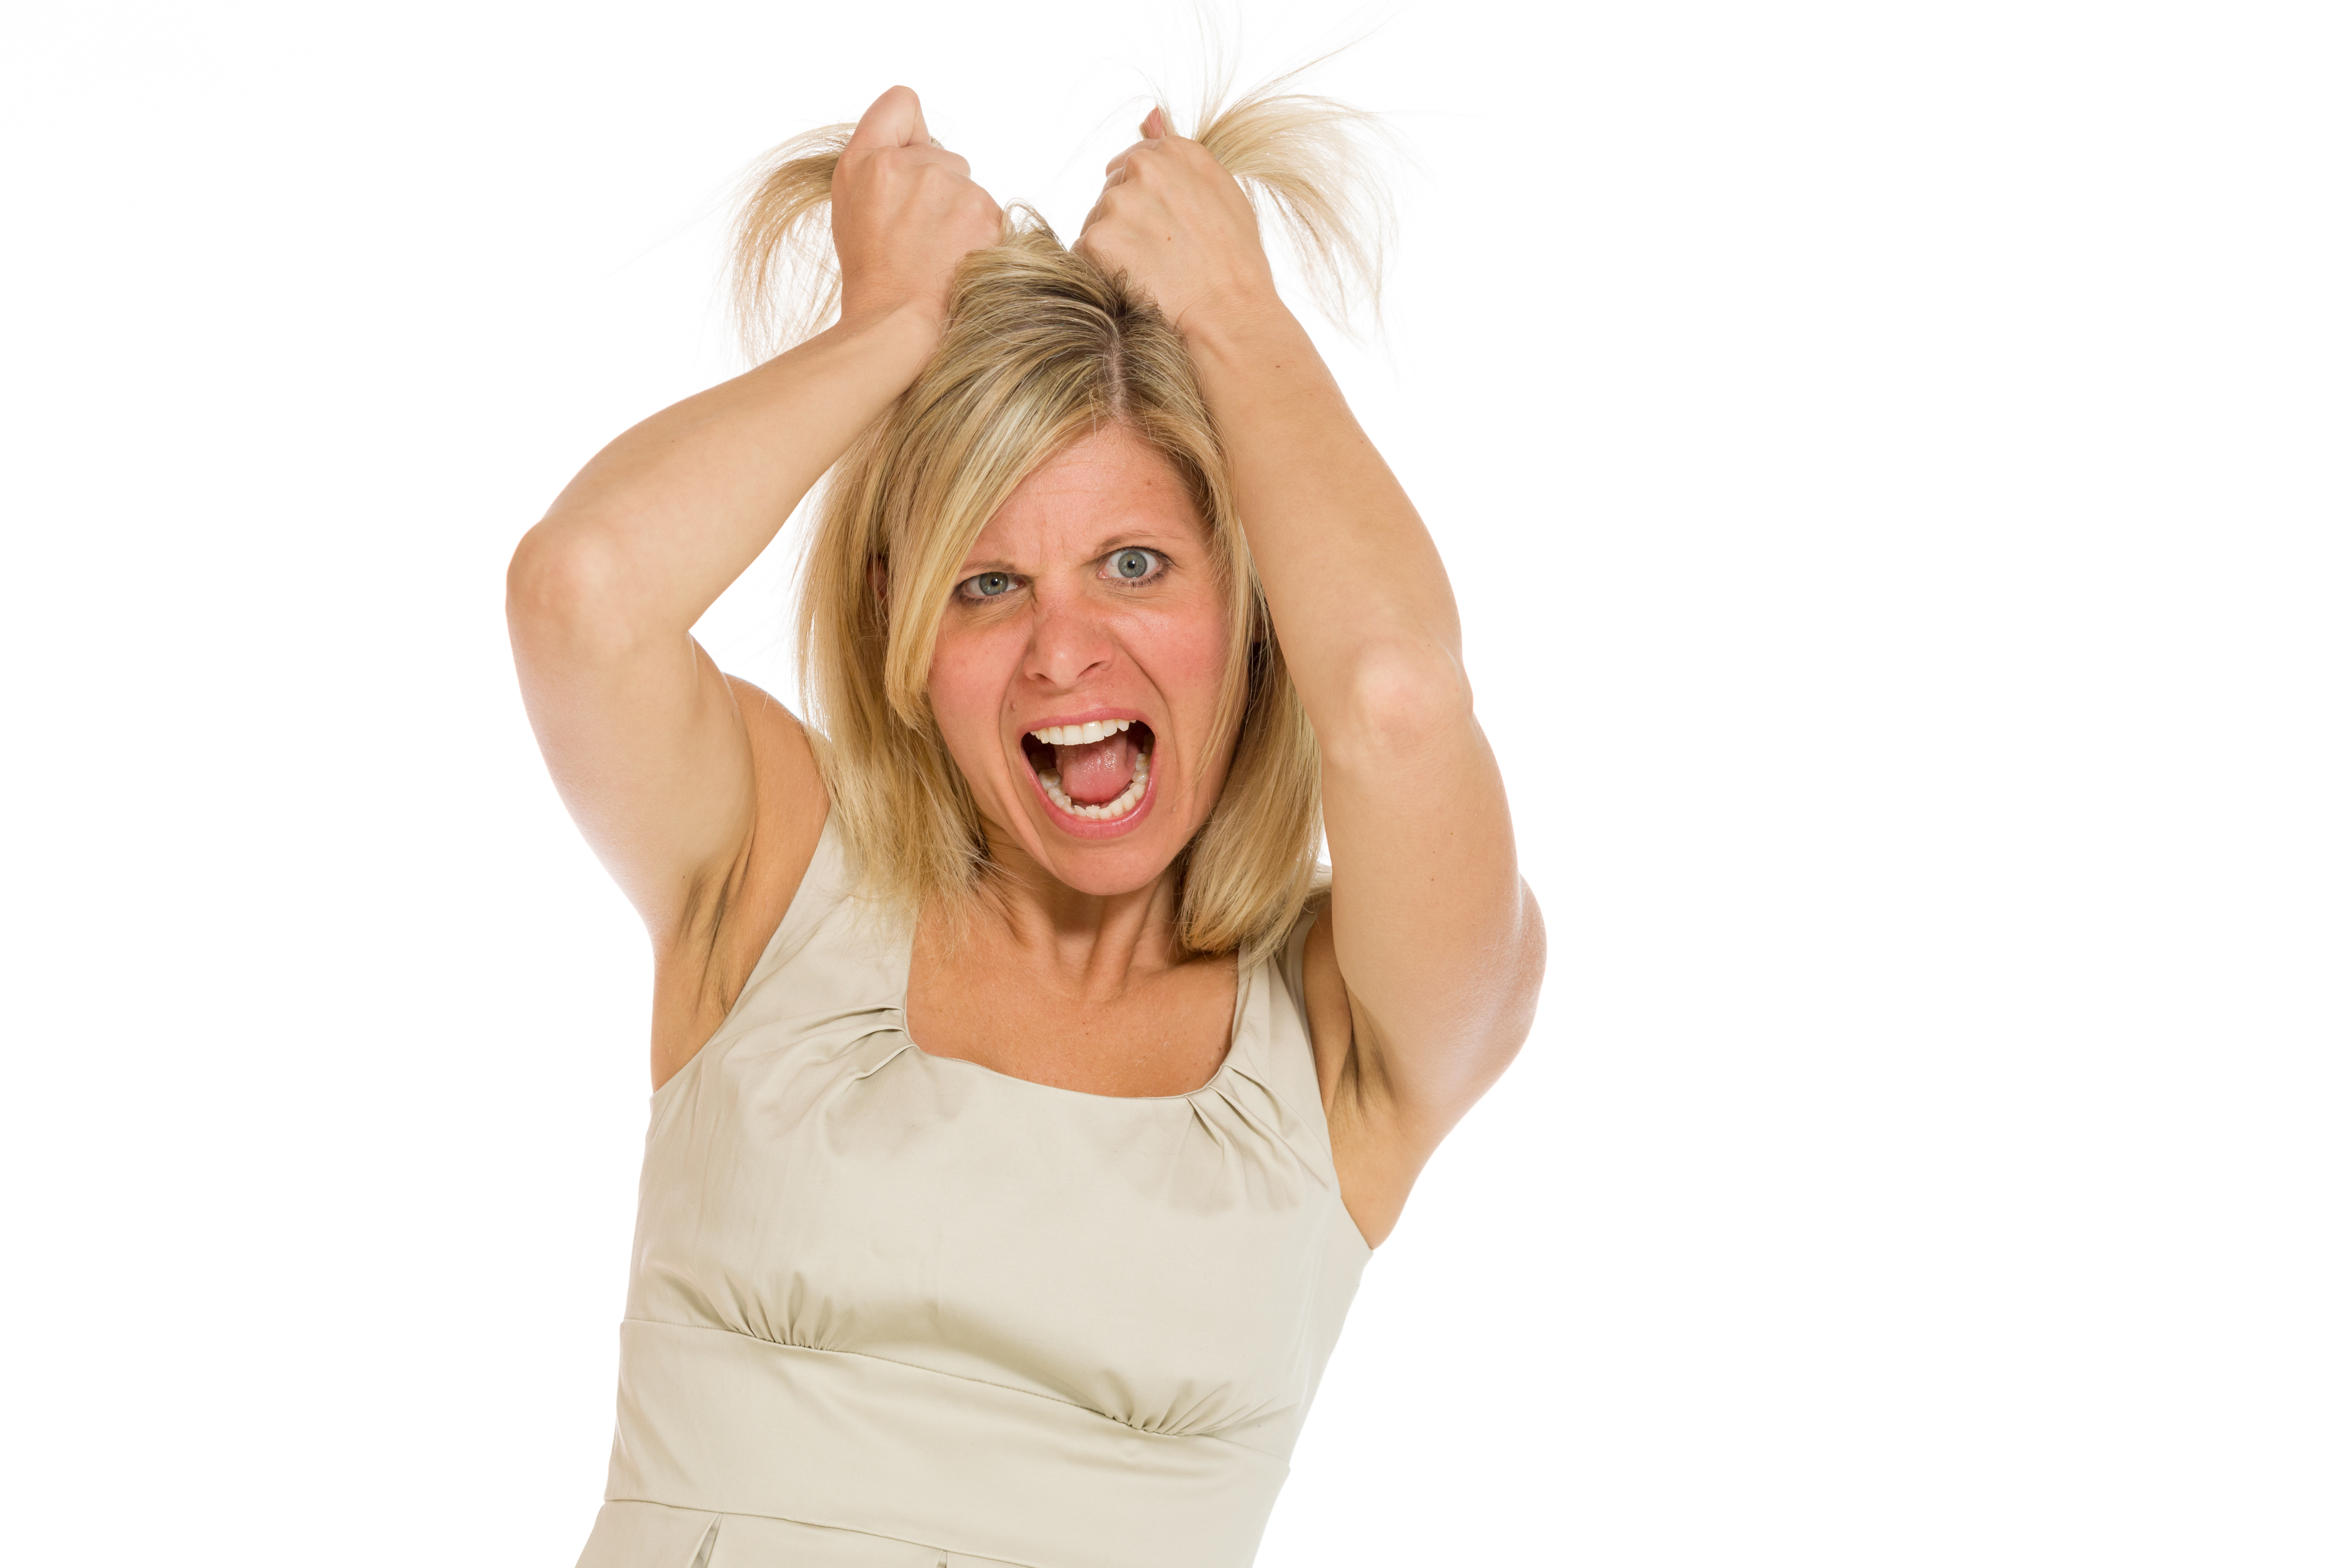 An angry woman | Shutterstock